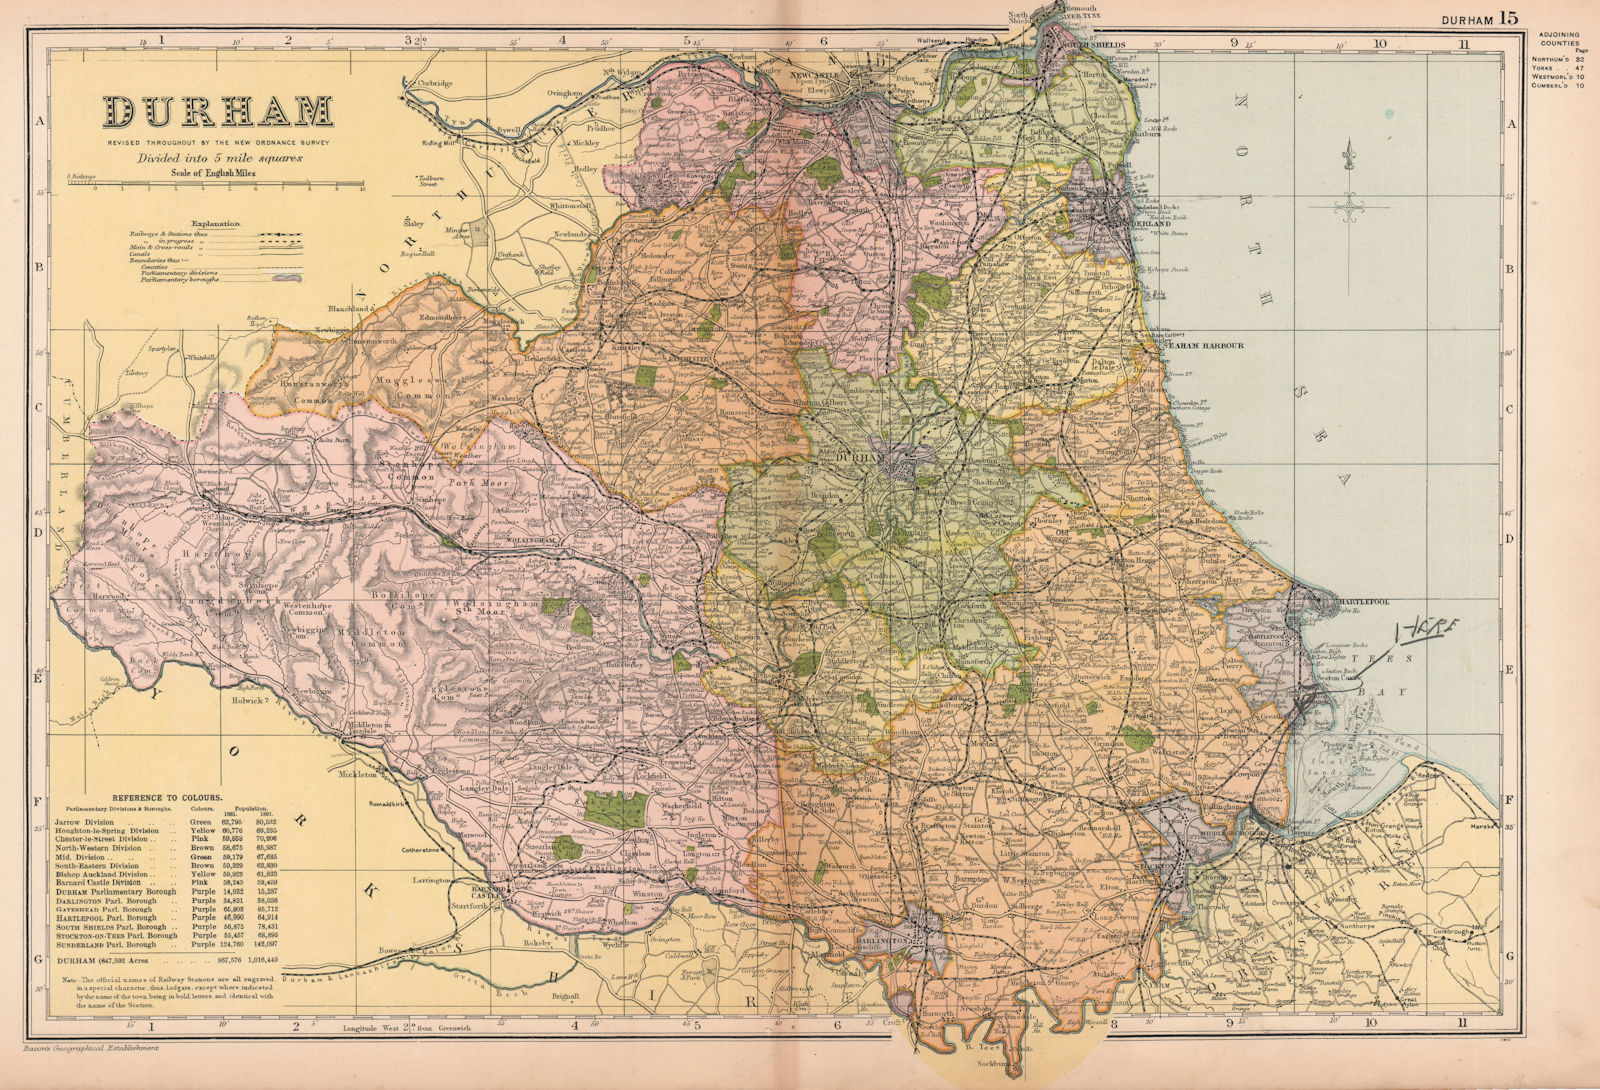 Associate Product DURHAM. Showing Parliamentary divisions, boroughs & parks. BACON 1901 old map